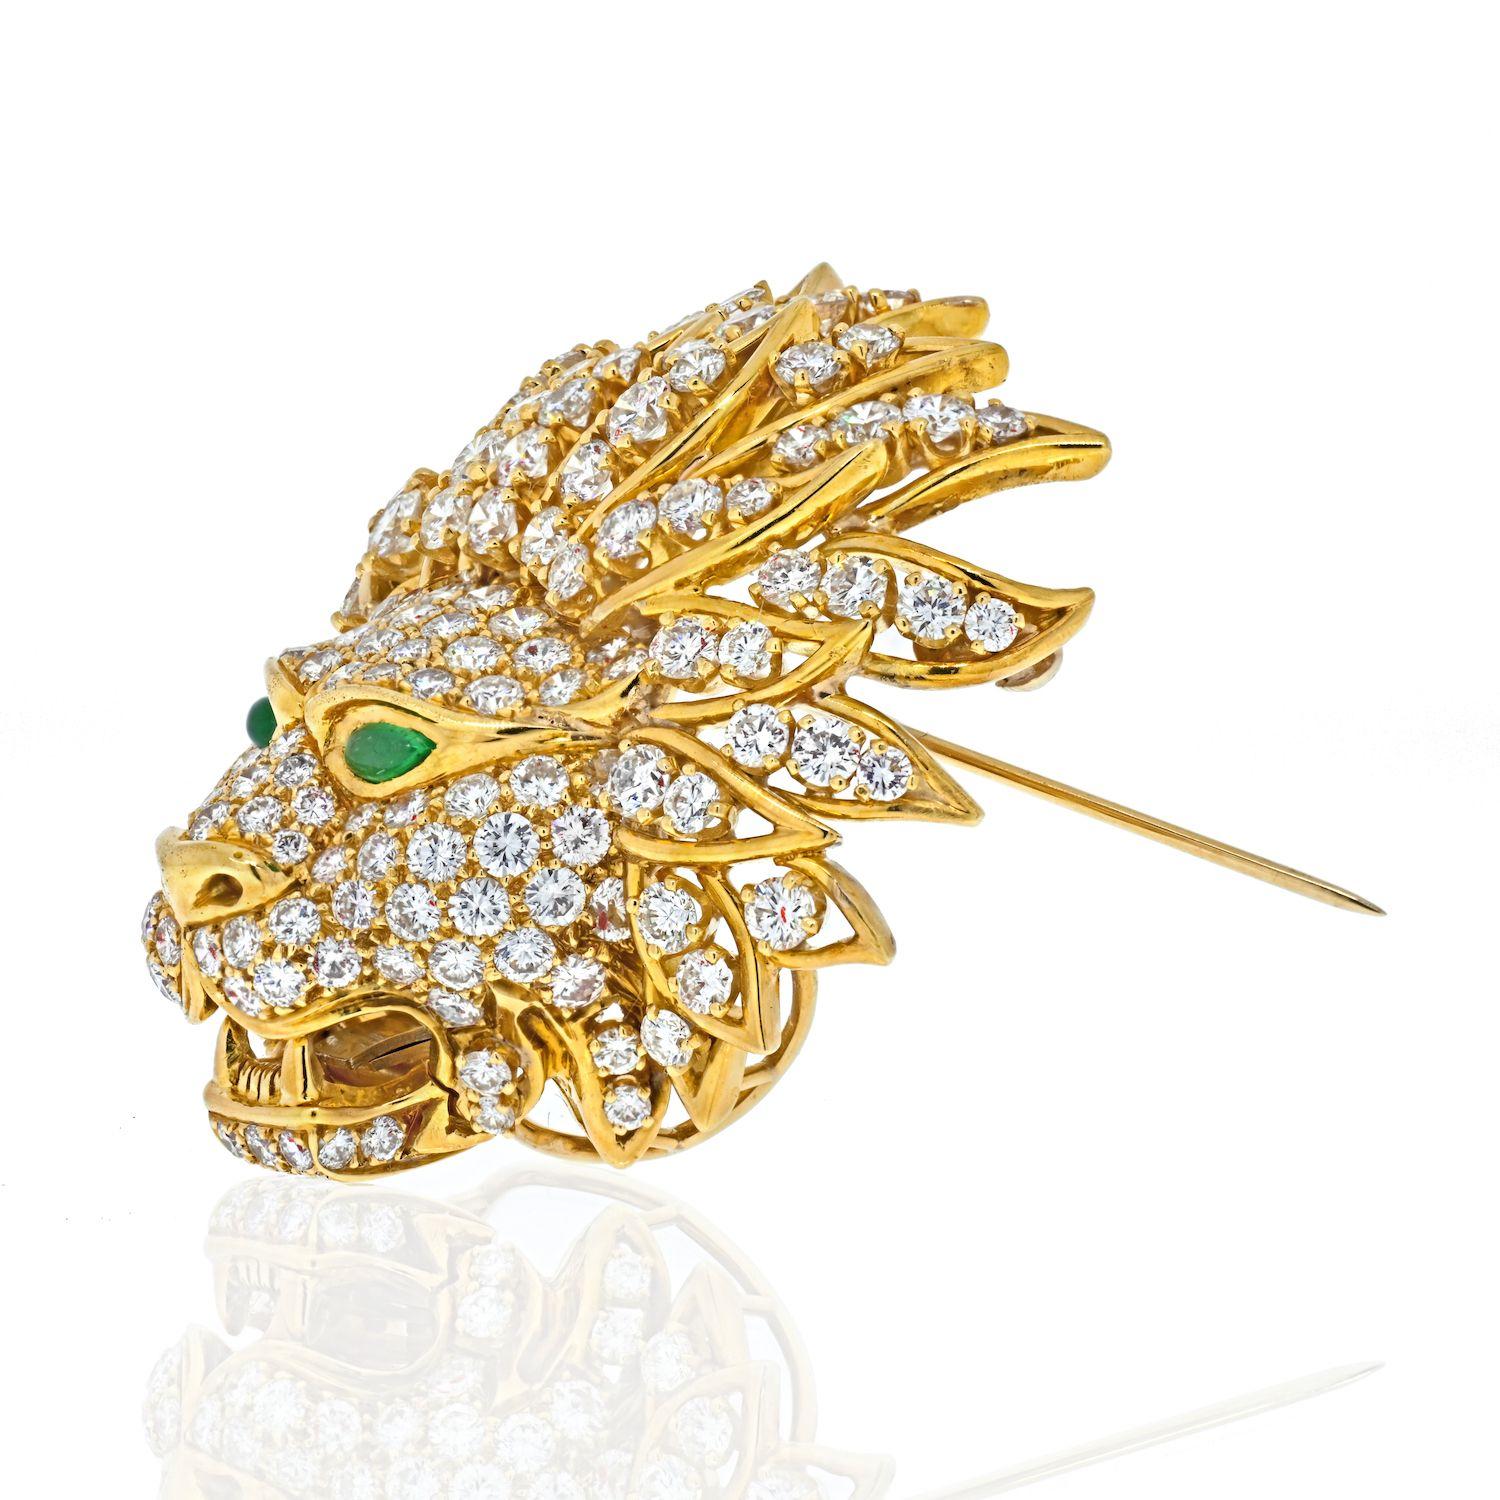 Lovely Van Cleef & Arpels diamond lion mask brooch. Made in 18K yellow gold, paved with round brilliant cut diamonds, and pear-shaped emerald eyes, signed Van Cleef & Arpels, numbered, with French assay and maker's mark.
